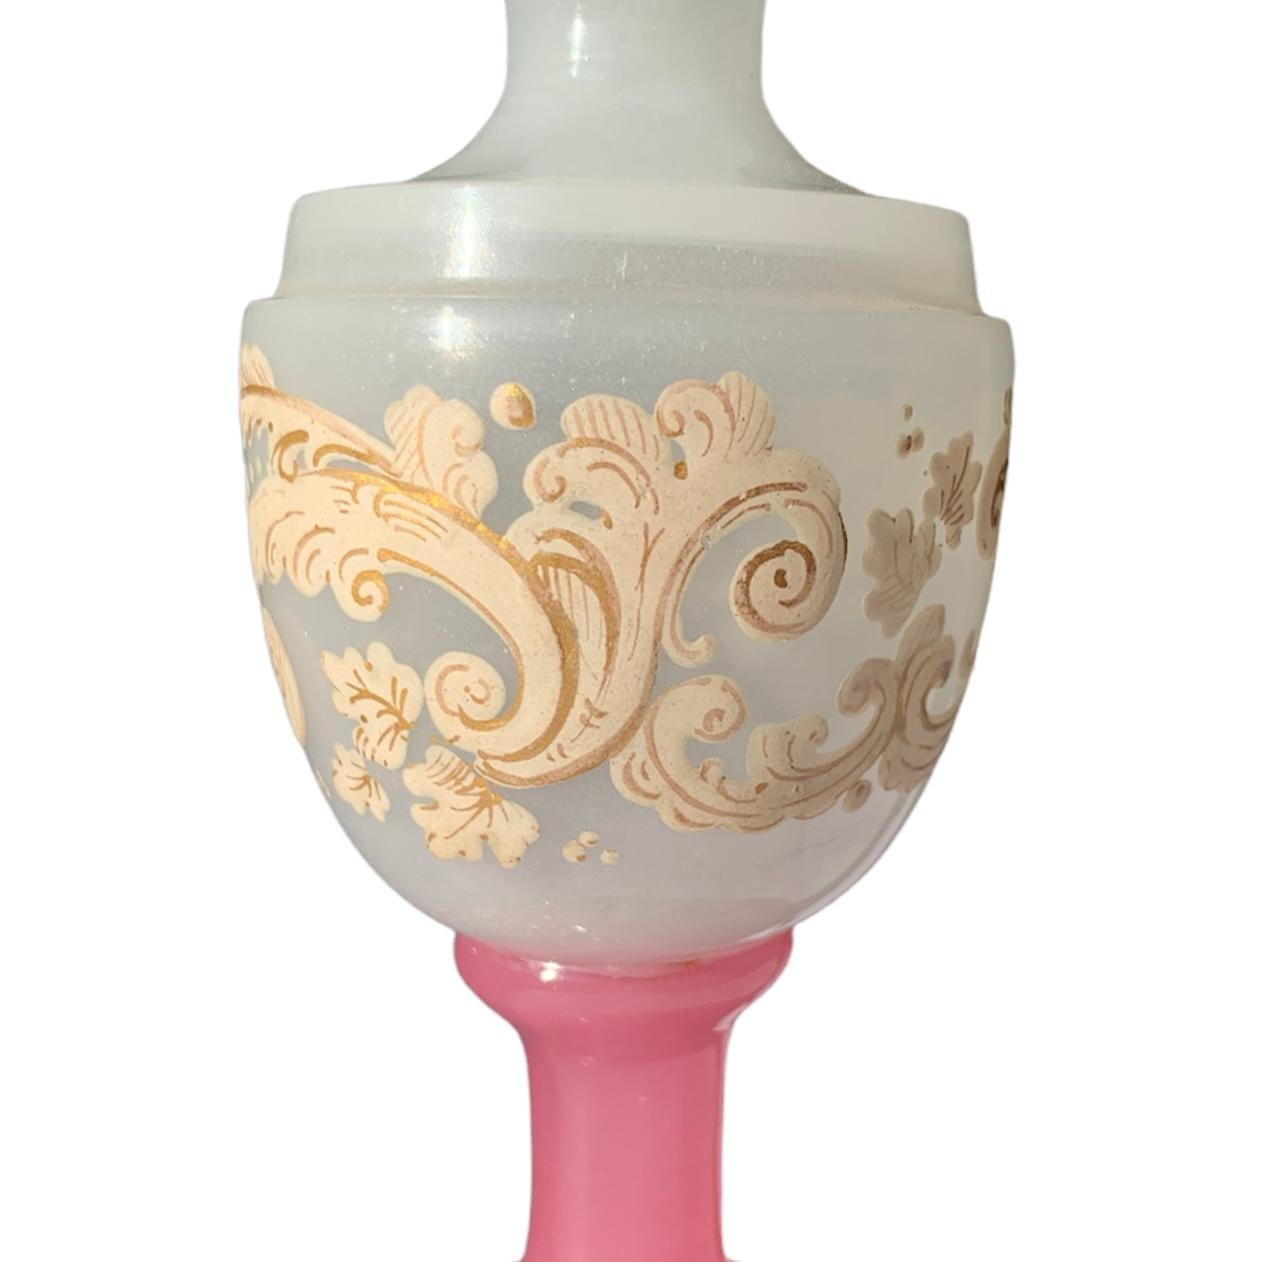 Antique Pink Opaline Enameled Glass Perfume Bottle, Flacon, 19th Century In Good Condition For Sale In Rostock, MV